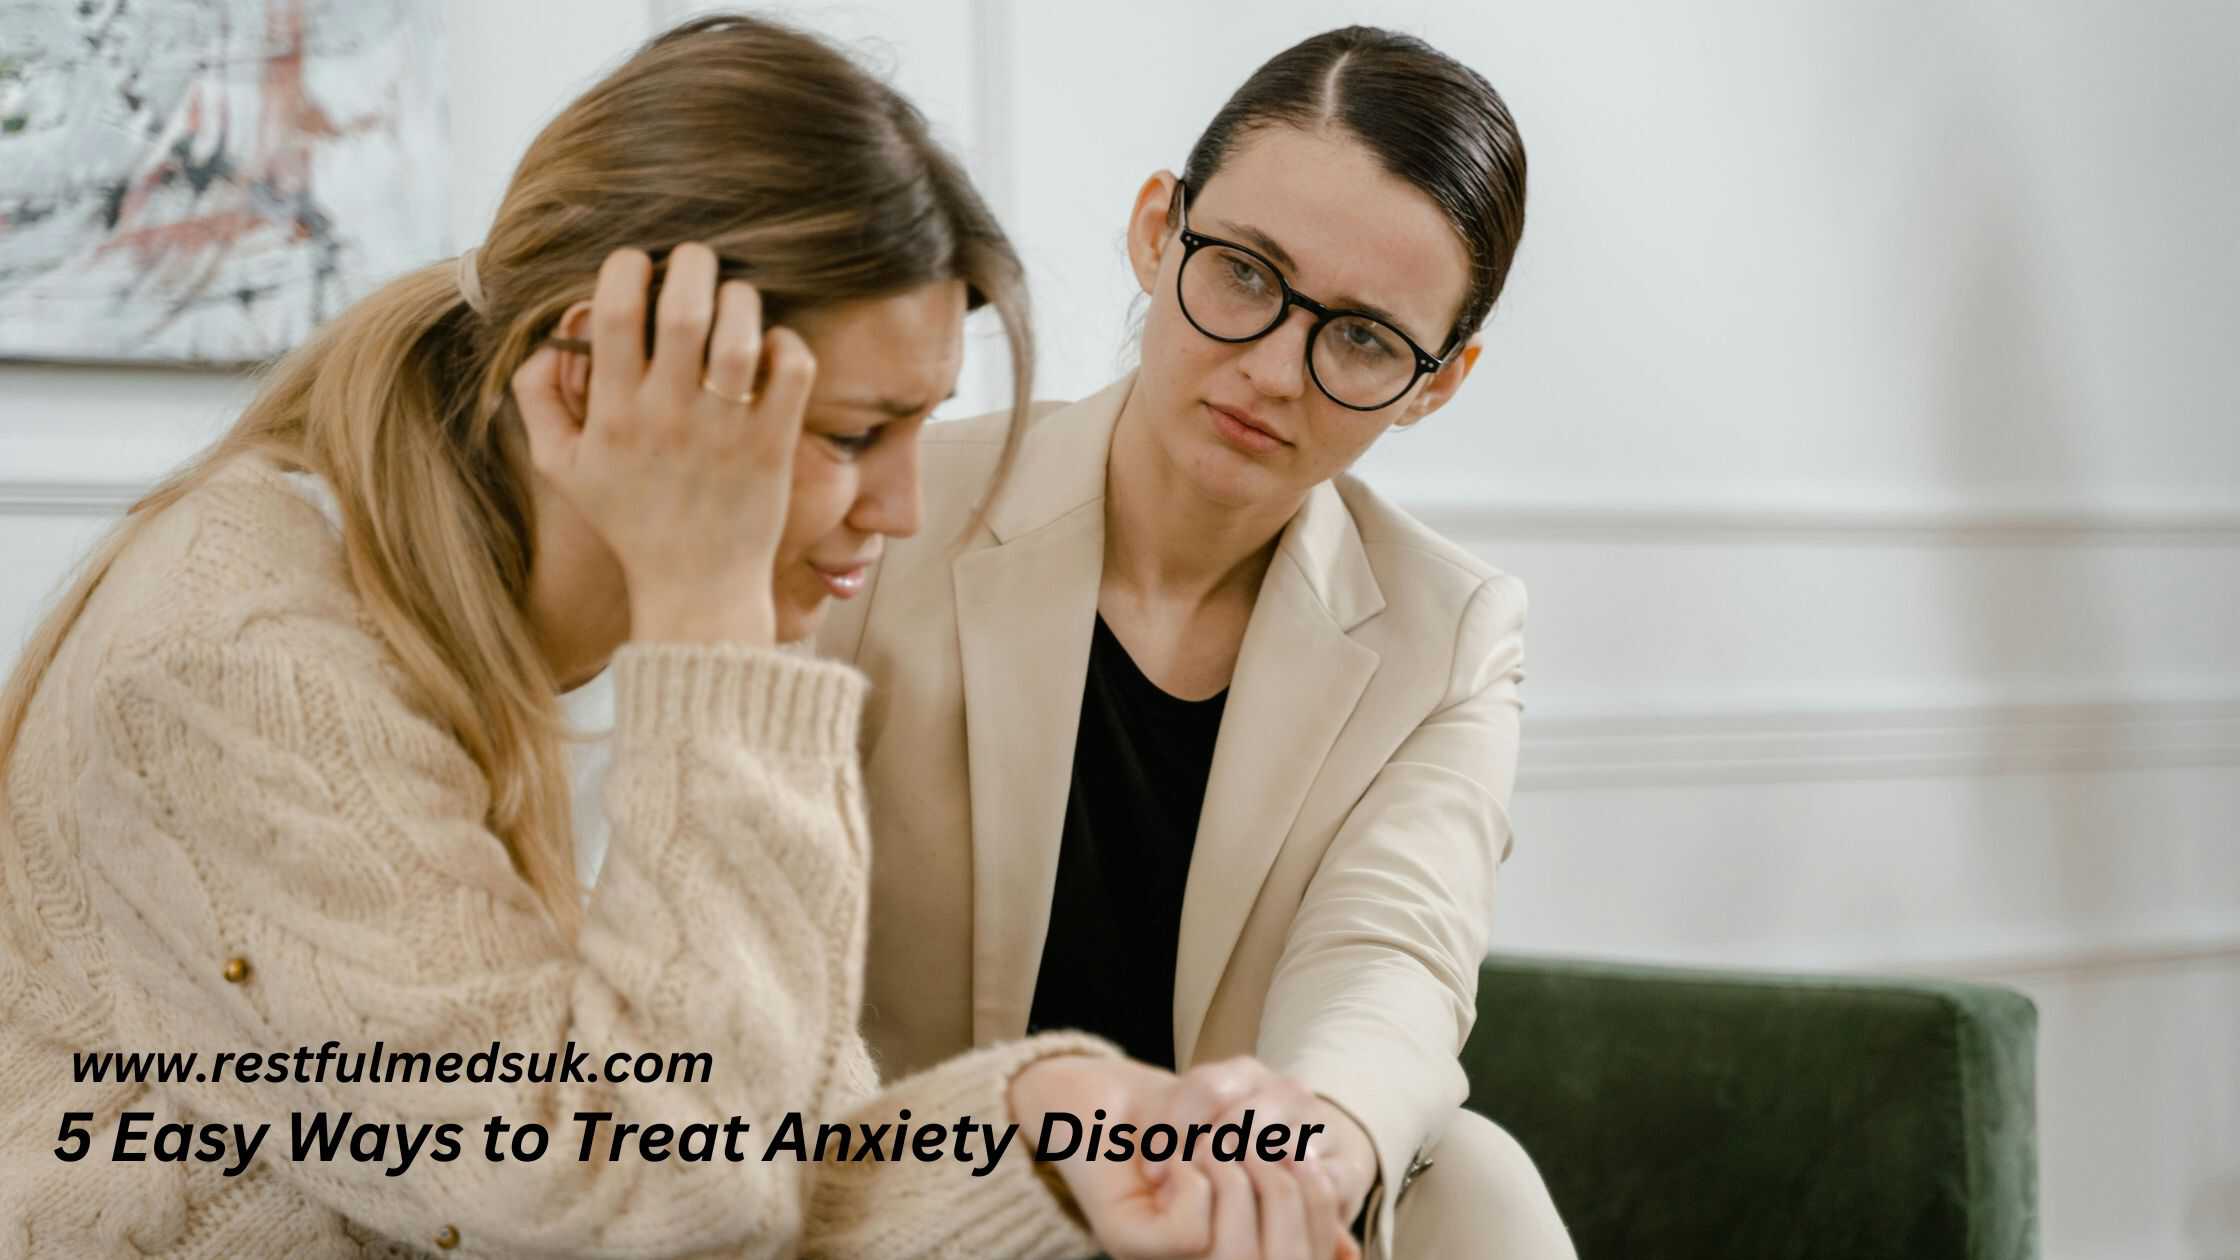 5 Easy Ways to Treat Anxiety Disorder